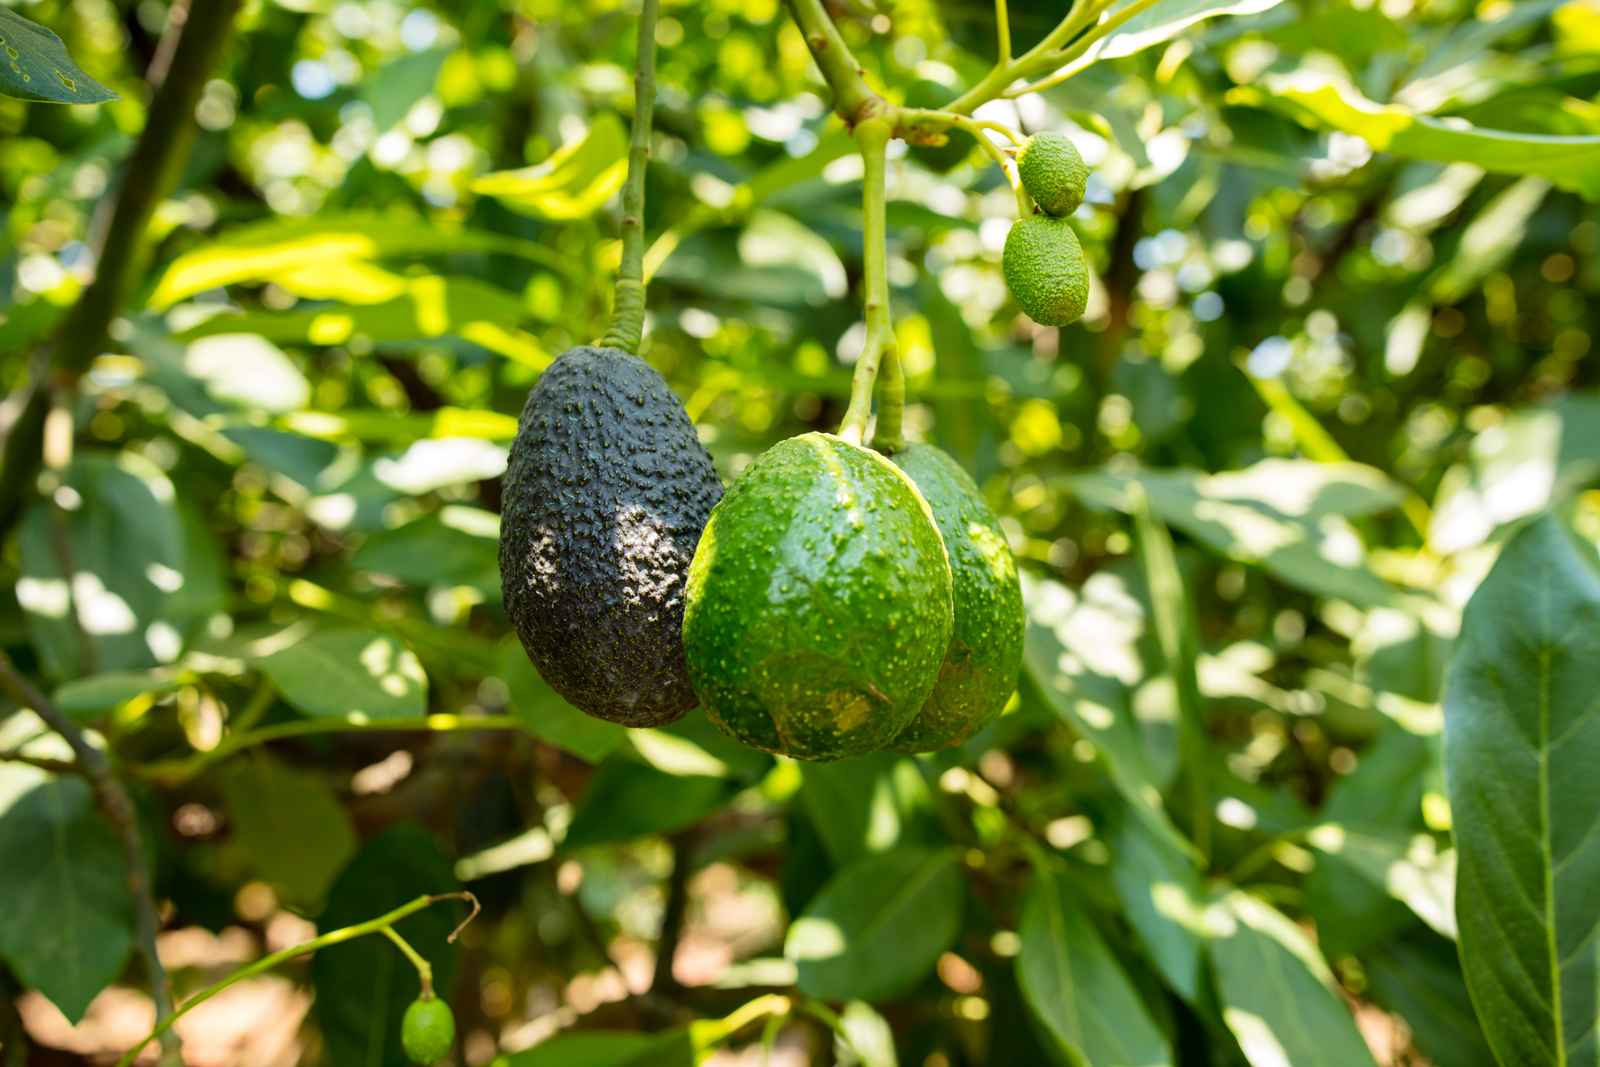 Growing of avocados